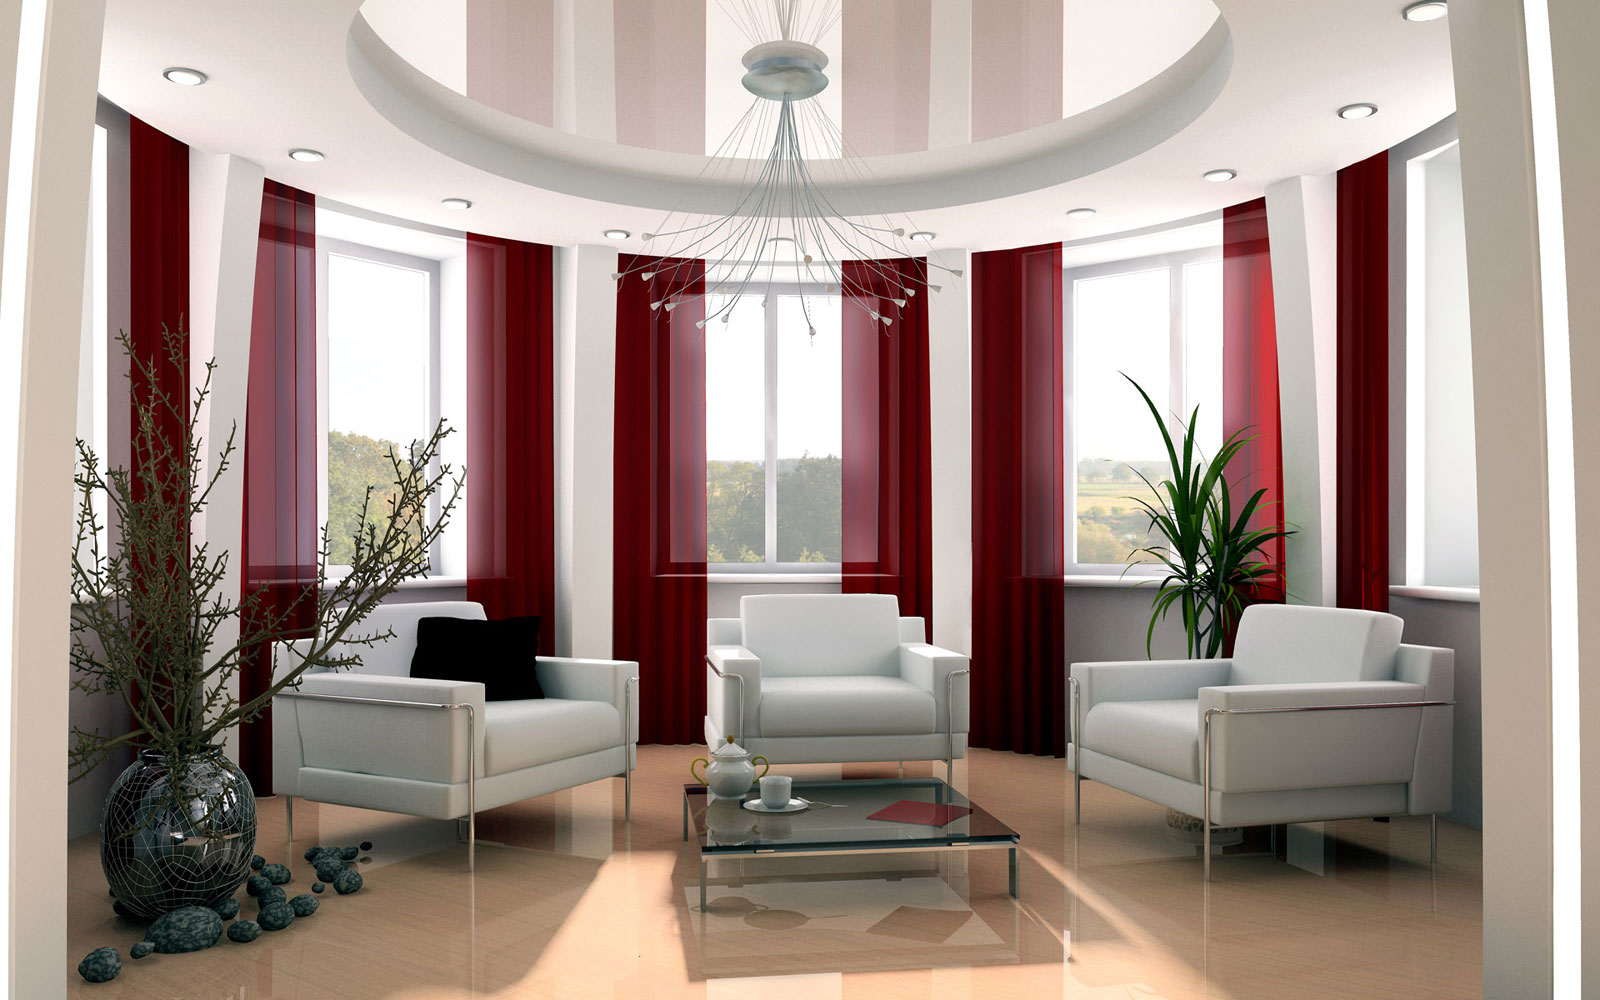 Interior Design Modern Adorable Interior Design Styles In Modern Living Room Applying White Room Color Matched With Red Curtains Furnished With White Chairs And Completed With Glass Table Interior Design Composing The Classic Or Modern Interior Design Styles